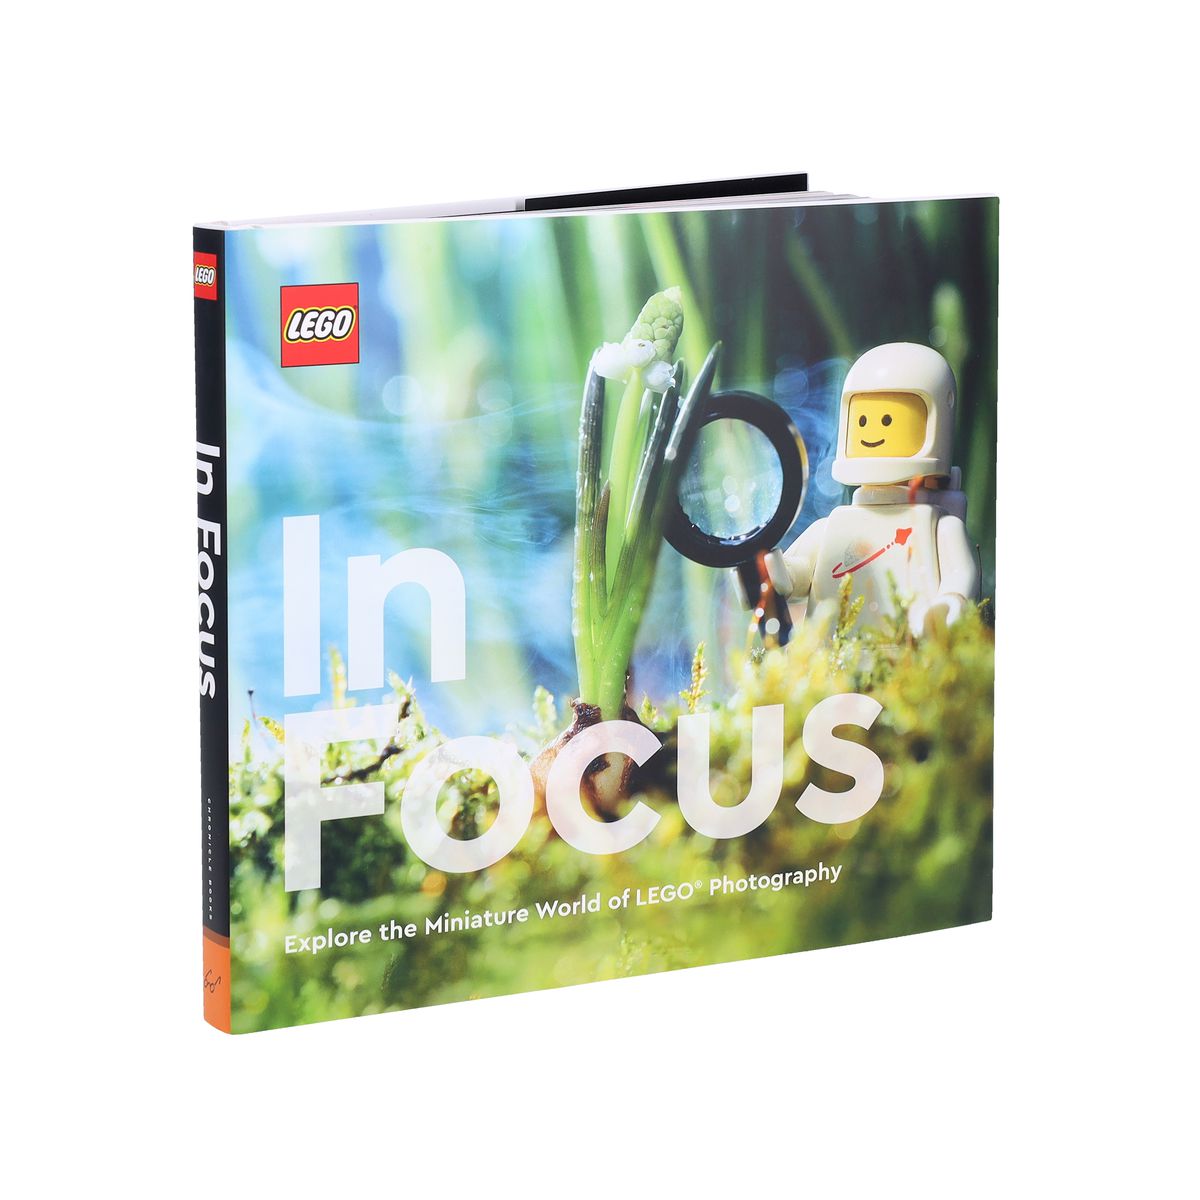 The cover to Lego in Focus, featuring a space helmet wearing man in white holding a magnifying glass looking at a small plant